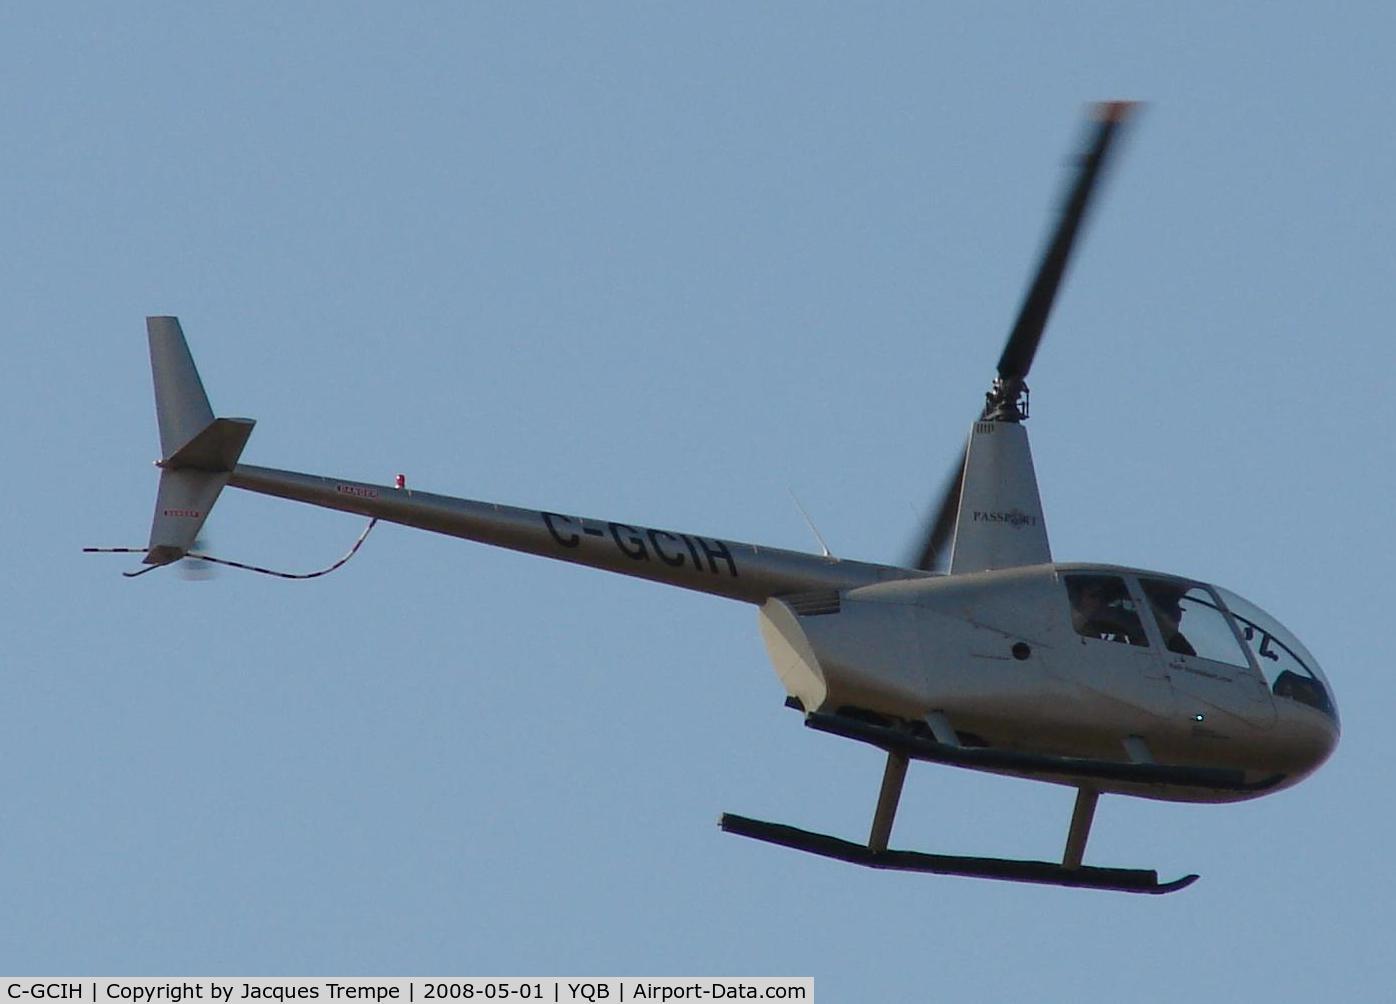 C-GCIH, 2006 Robinson R44 II C/N 11103, Over the St-Lawrence River bank